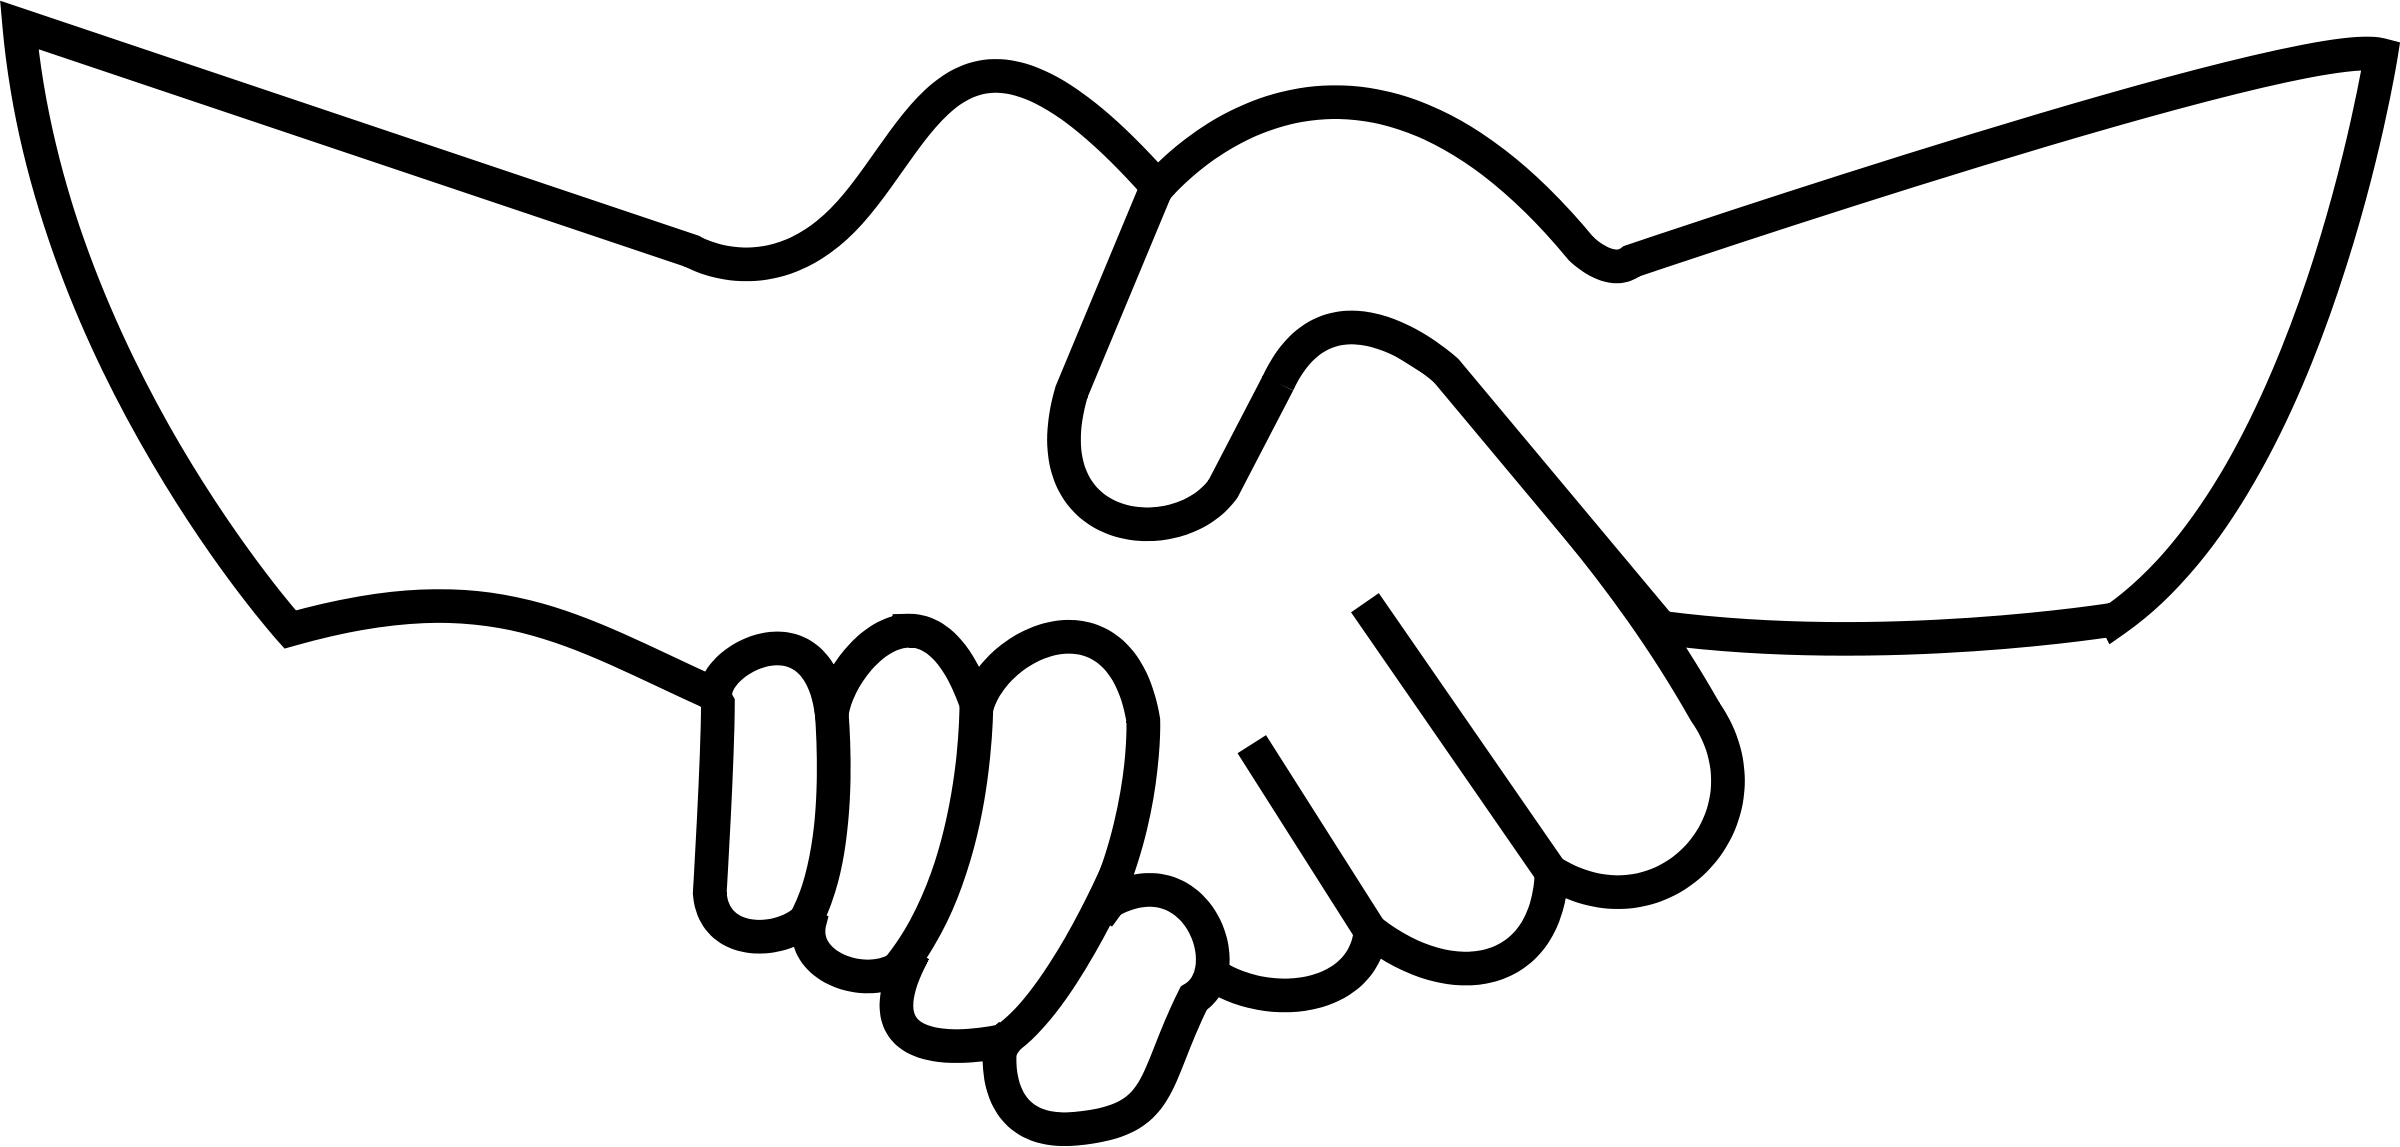 holding hands clipart black and white - Clip Art Library